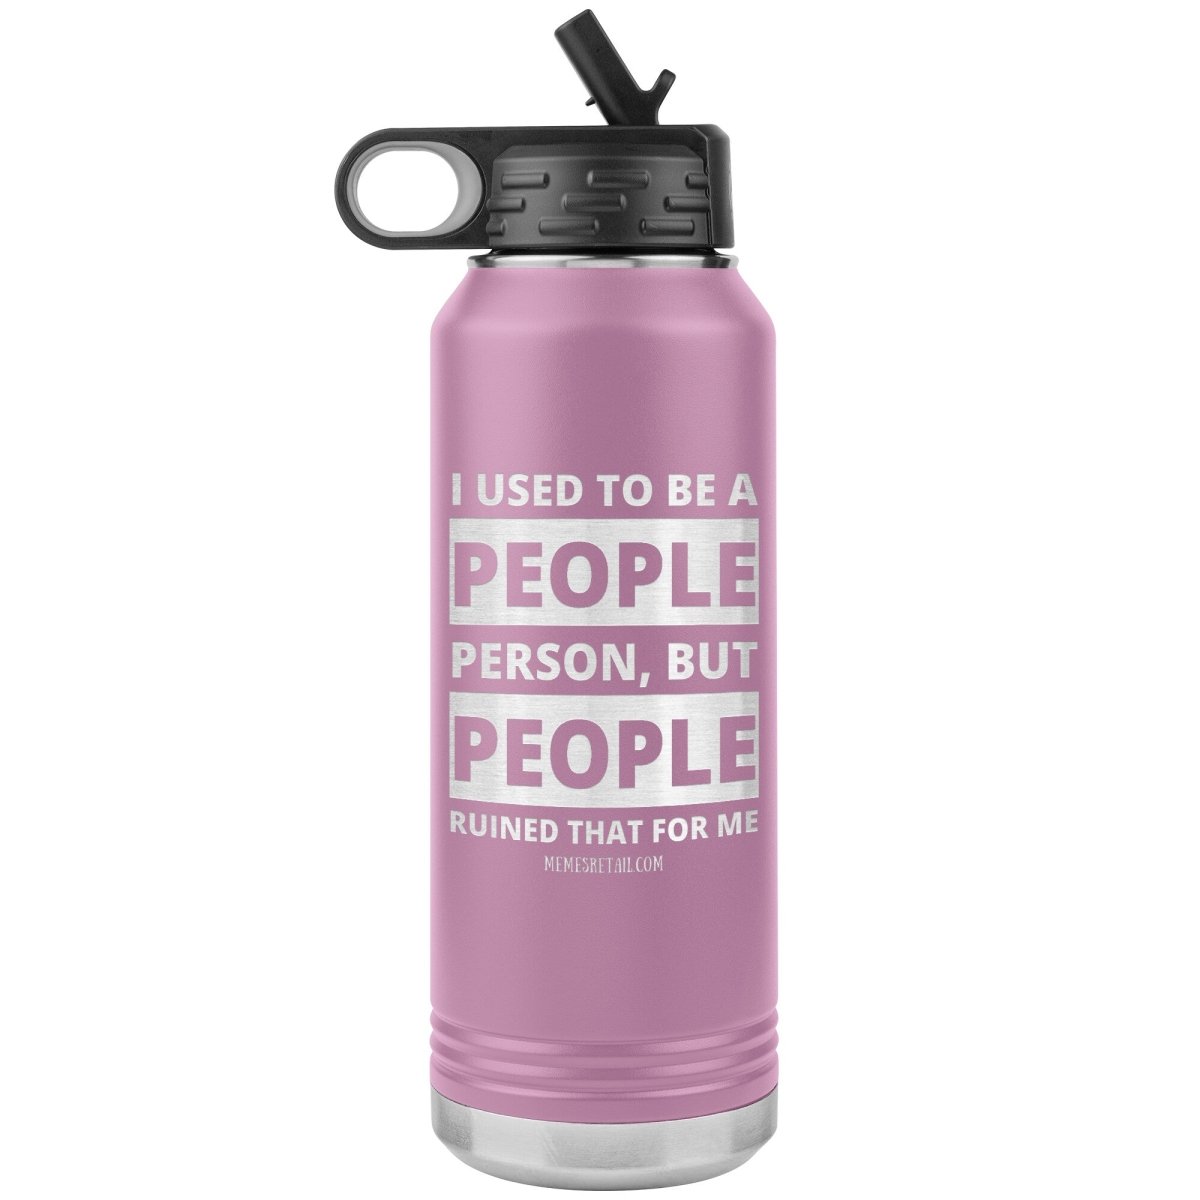 I Used To Be A People Person, But People Ruined That For Me 32 oz Water Tumbler, Light Purple - MemesRetail.com